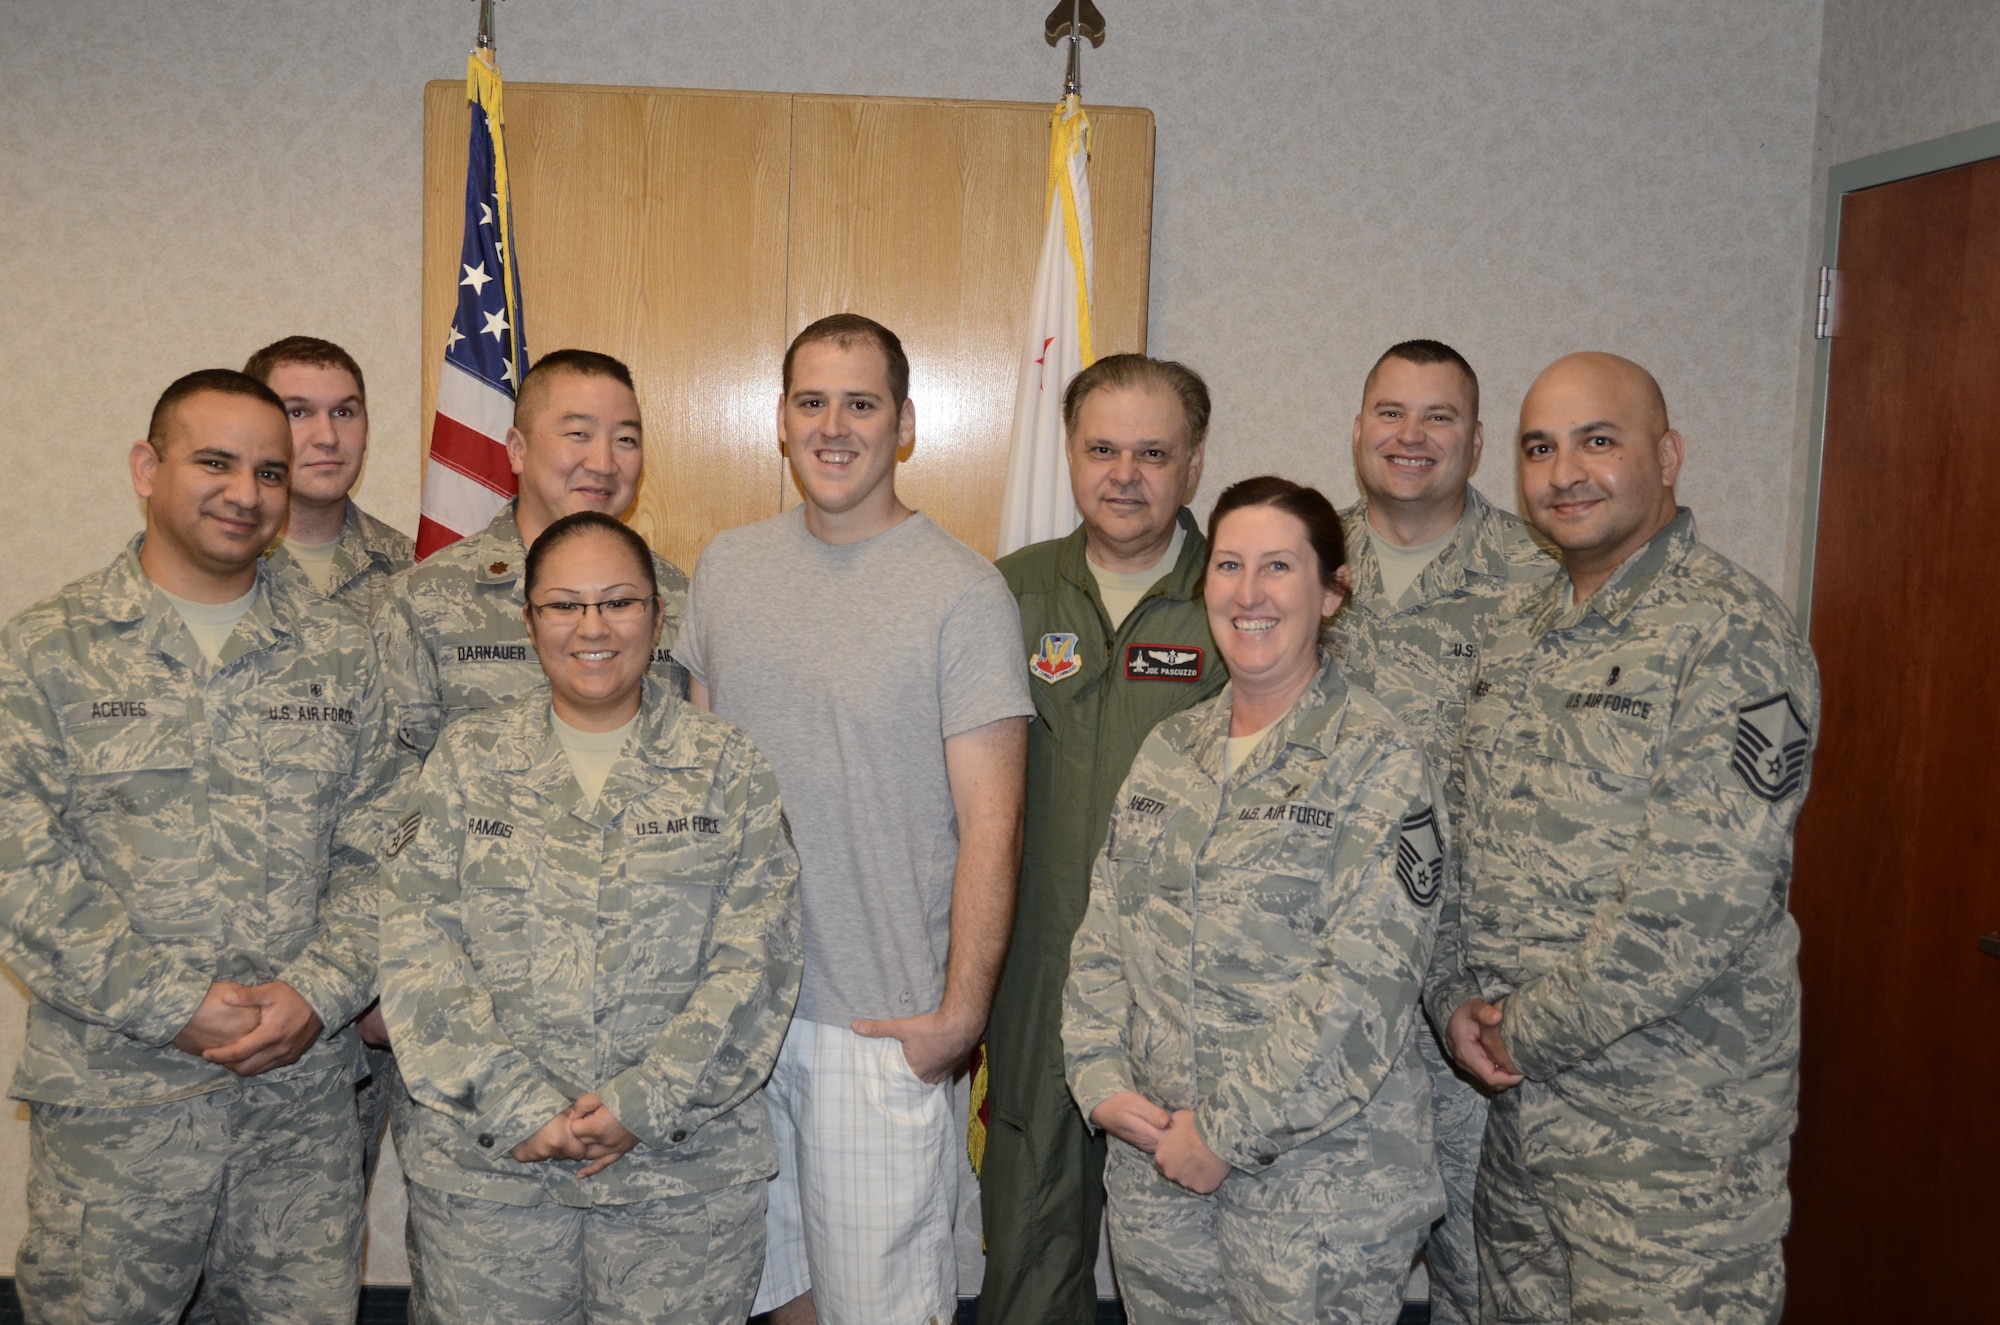 Tech. Sgt. Jason Cosgrave (center) poses with his fellow Airmen from the 144th Medical Group after re-enlisting in the California Air National Guard on January 31, 2012. Cosgrave overcame some personal adversities and was able to re-enlist into his former unit.  (Air National Guard photo by Senior Master Sgt. Chris Drudge)